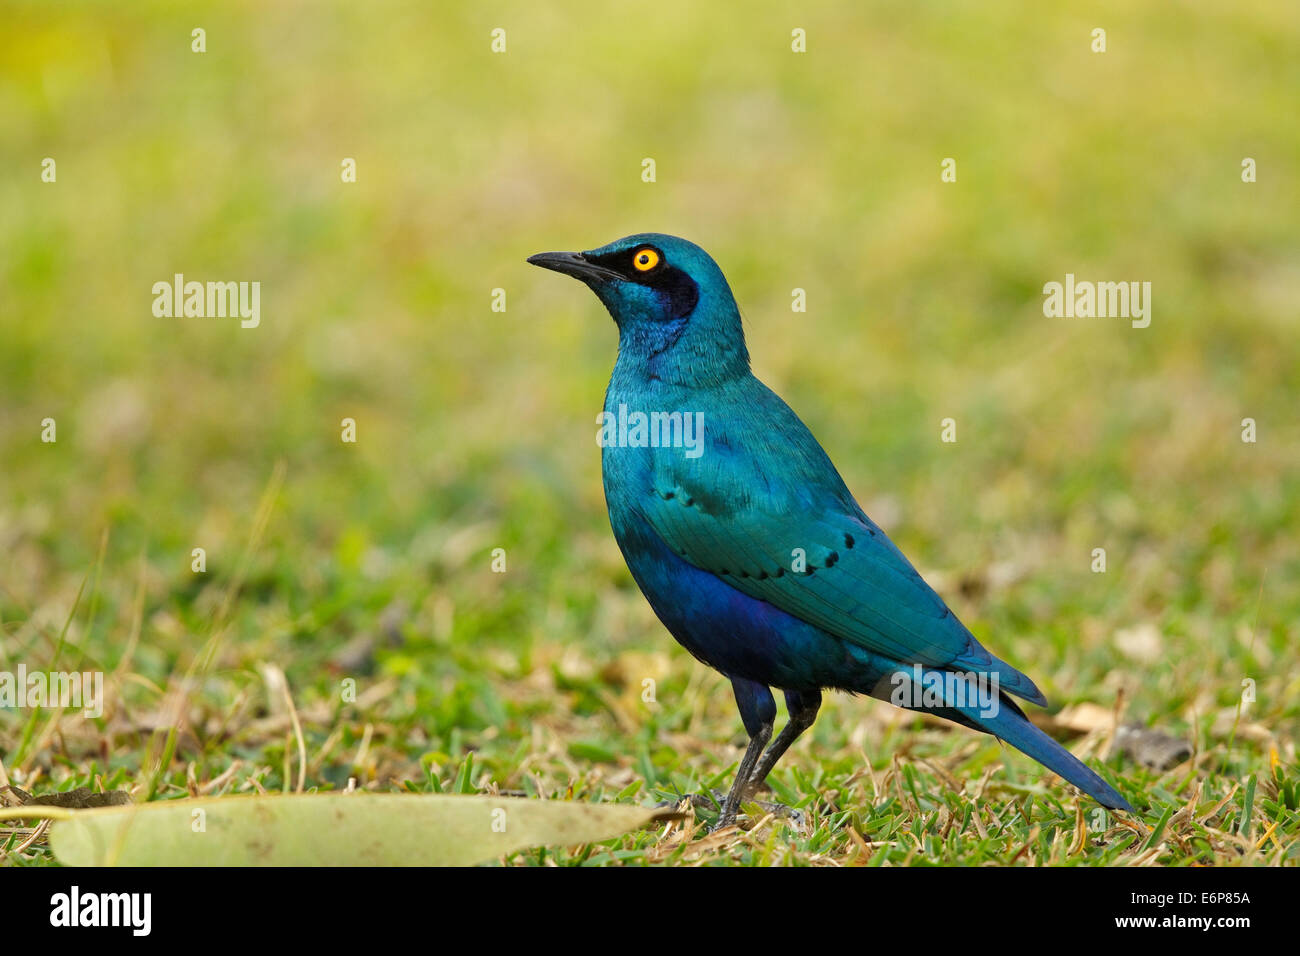 Greater Blue-eared Glossy-Starling (Lamprotornis chalybaeus ssp. nordmanni), Greater Blue-eared Starling, Sturnidae Stock Photo